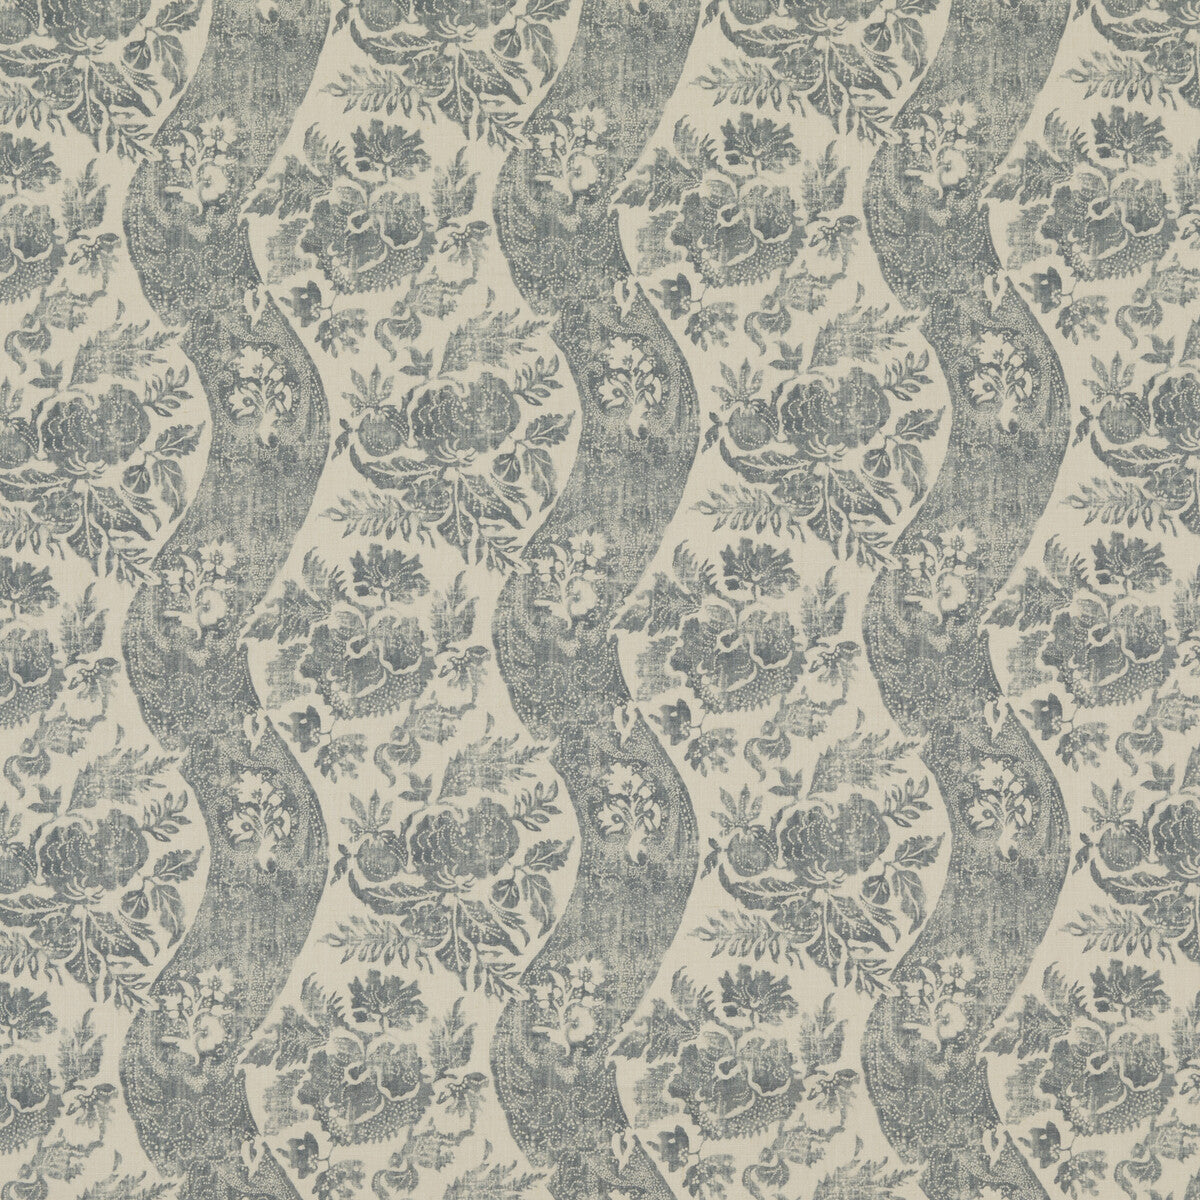 Caldbeck fabric in soft blue color - pattern BP10776.3.0 - by G P &amp; J Baker in the Signature Prints collection